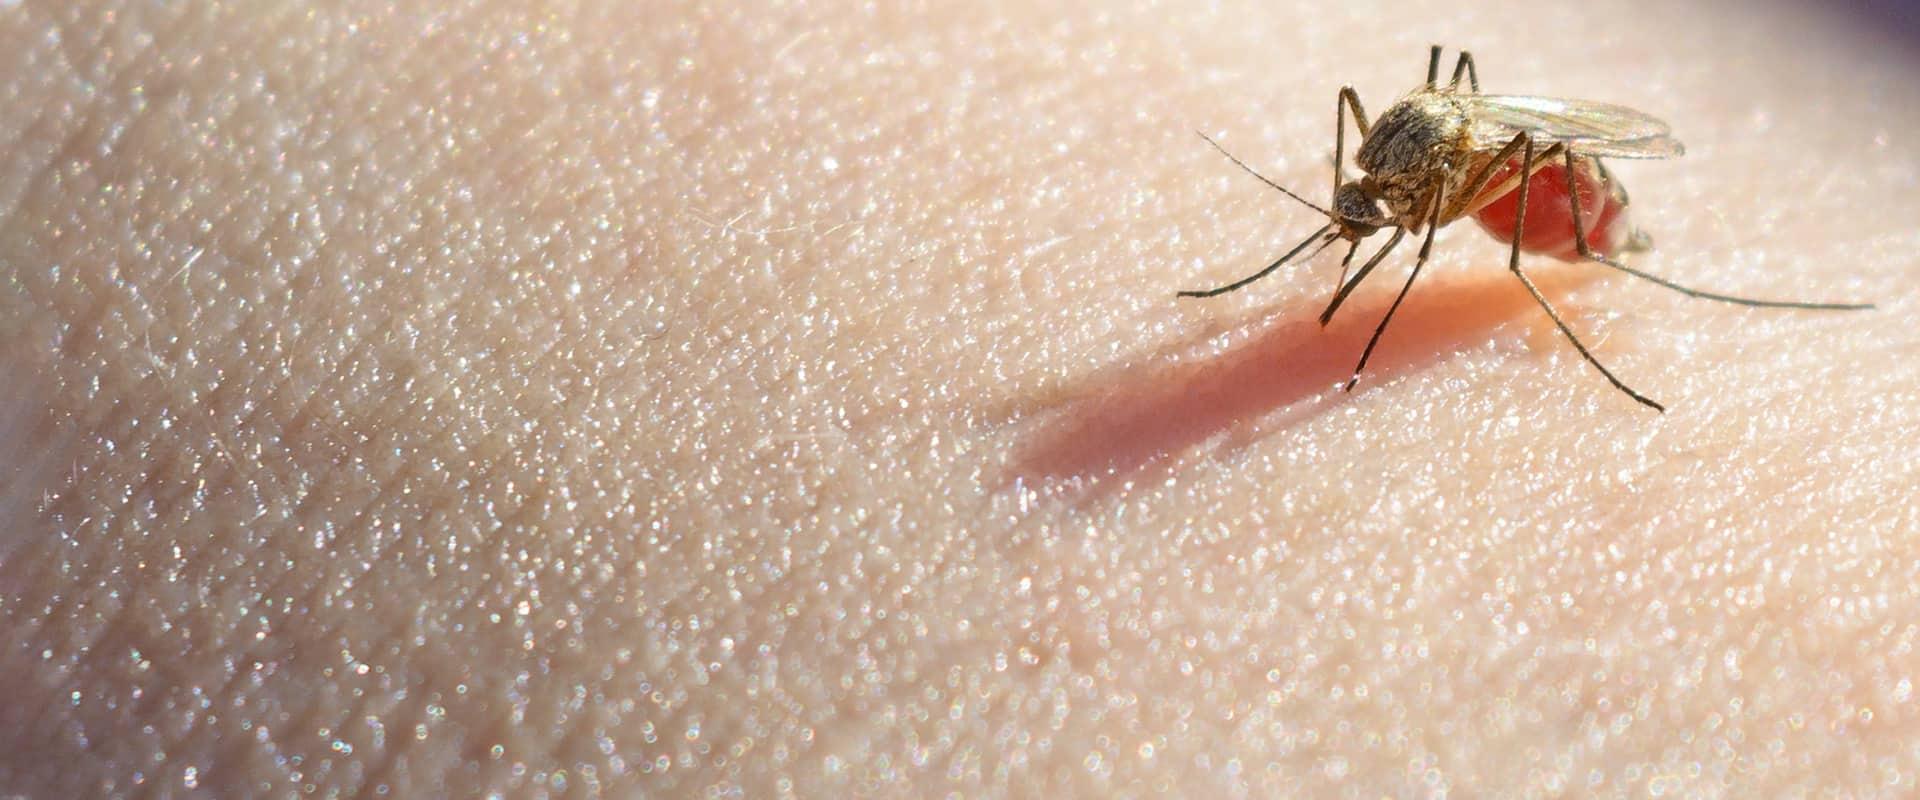 a blood-filled mosquito on keller tx resident